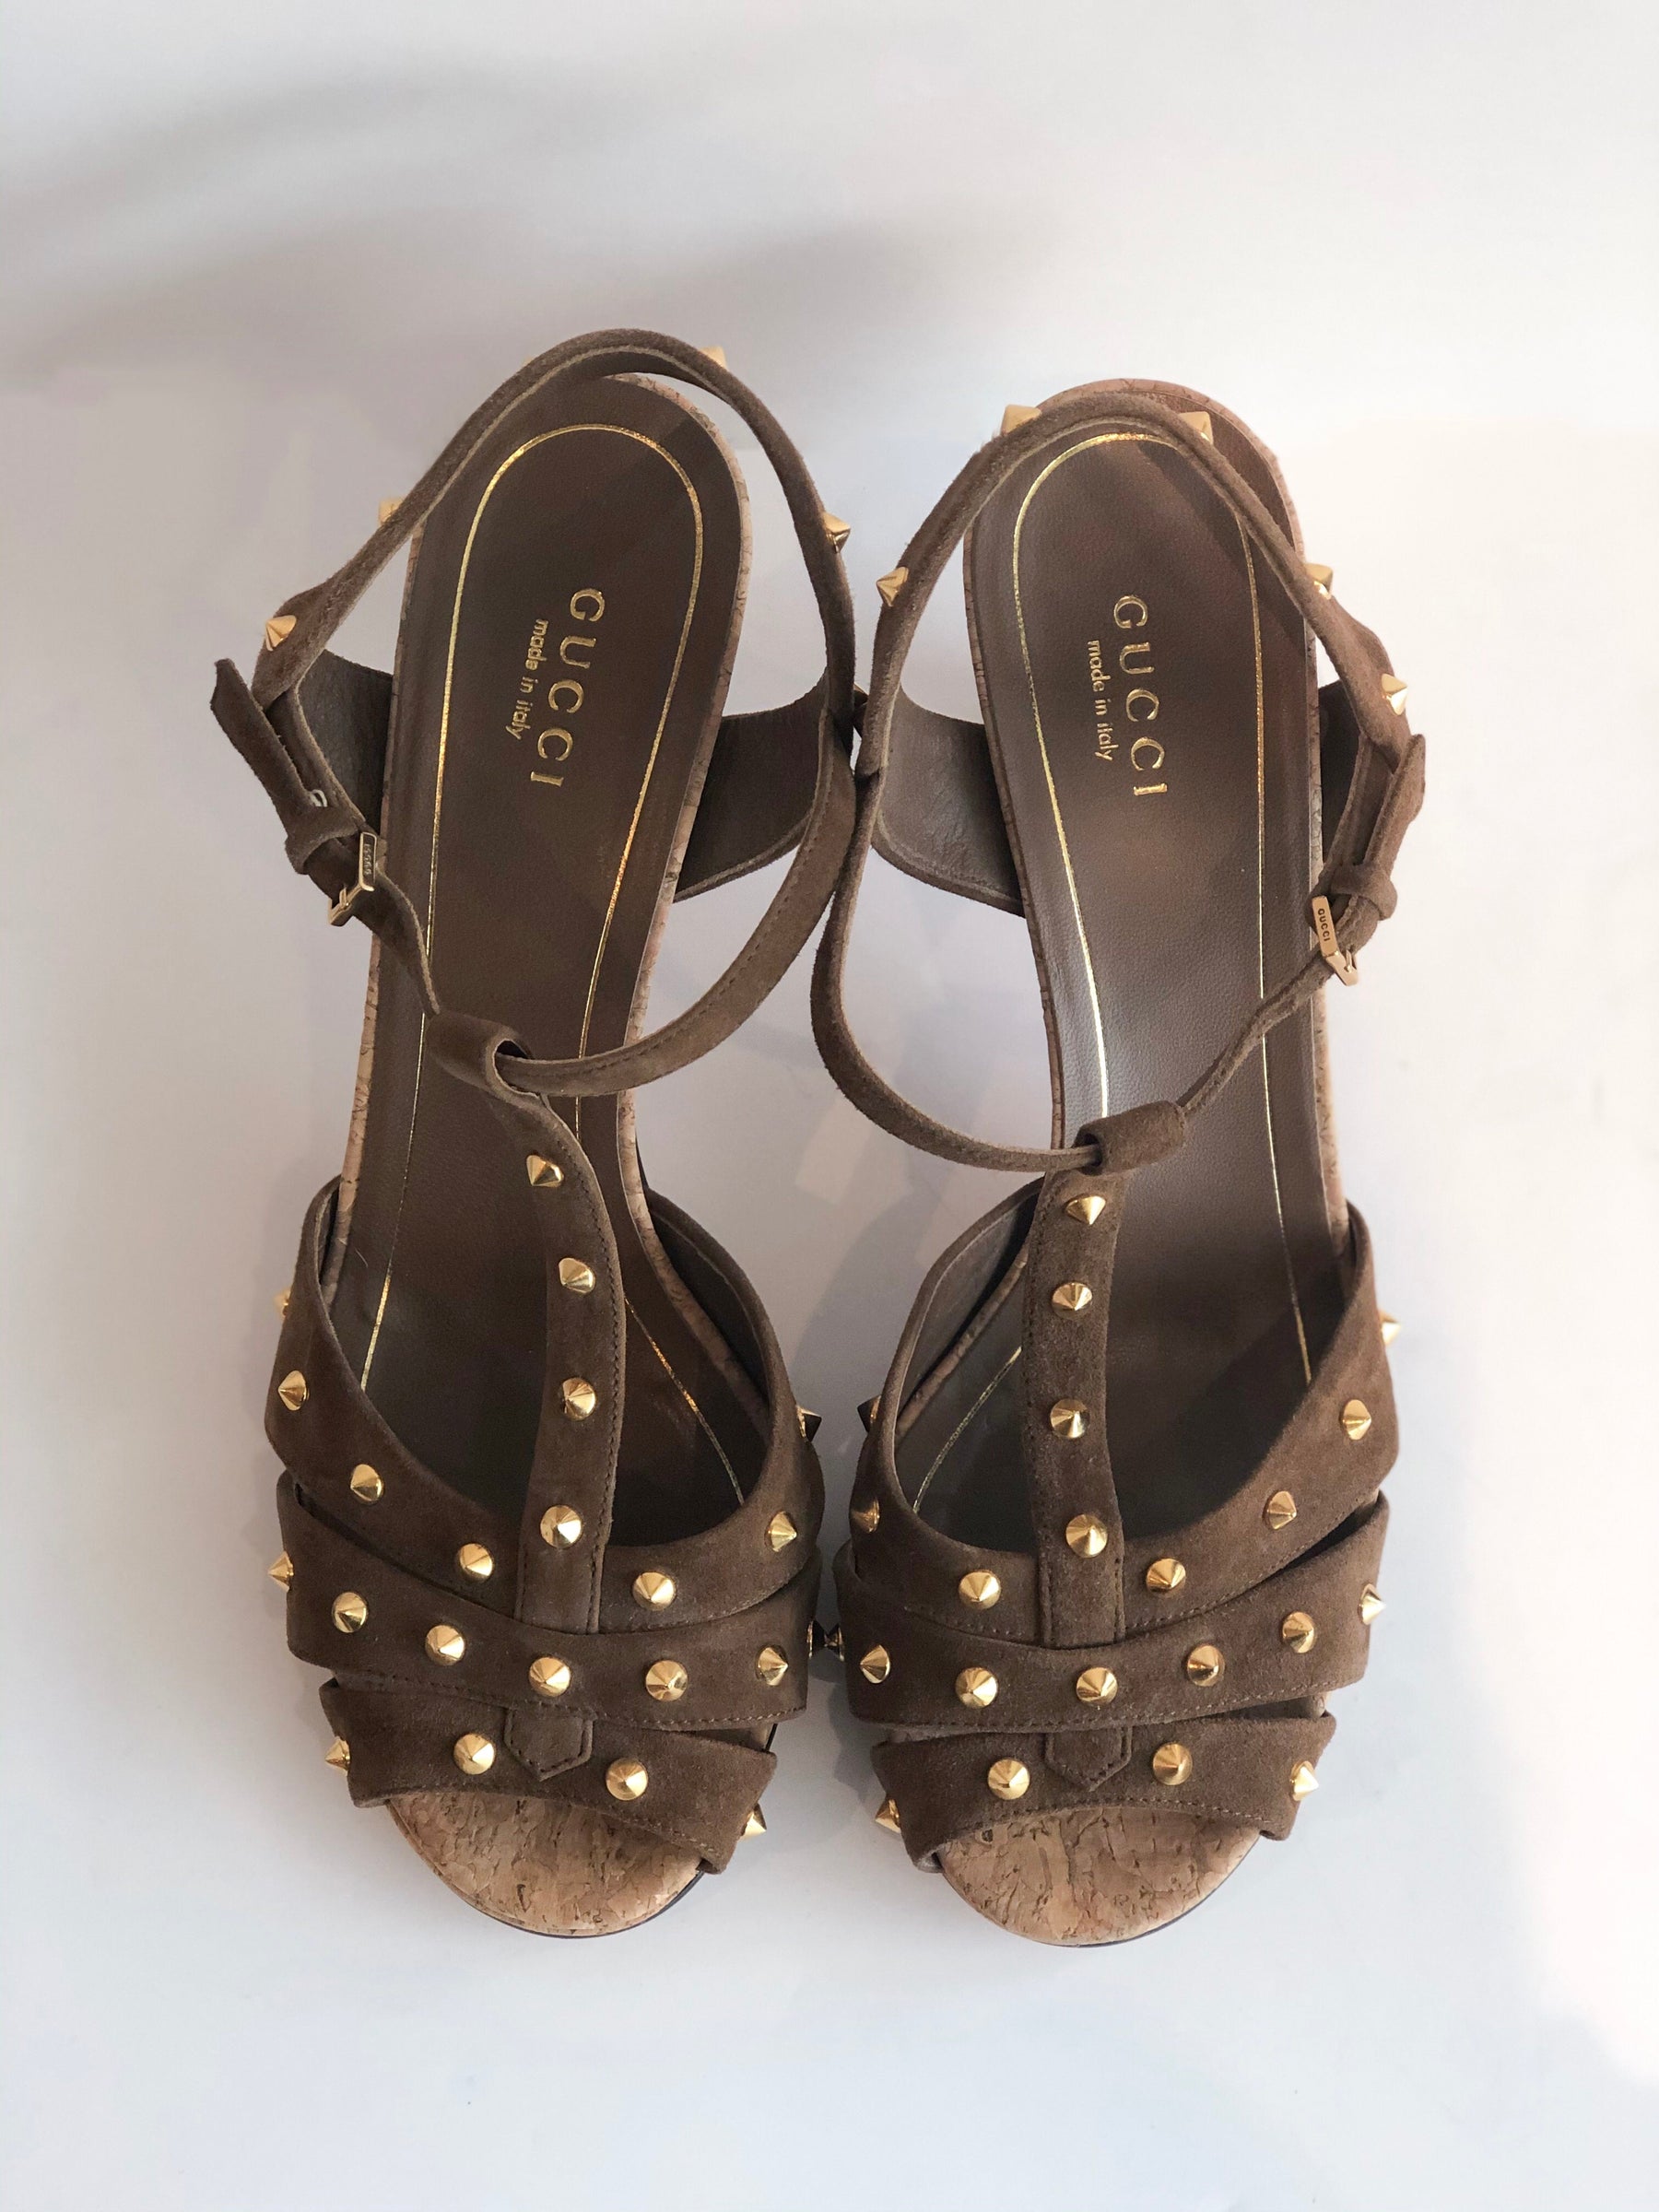 Gucci Studded Suede Heels